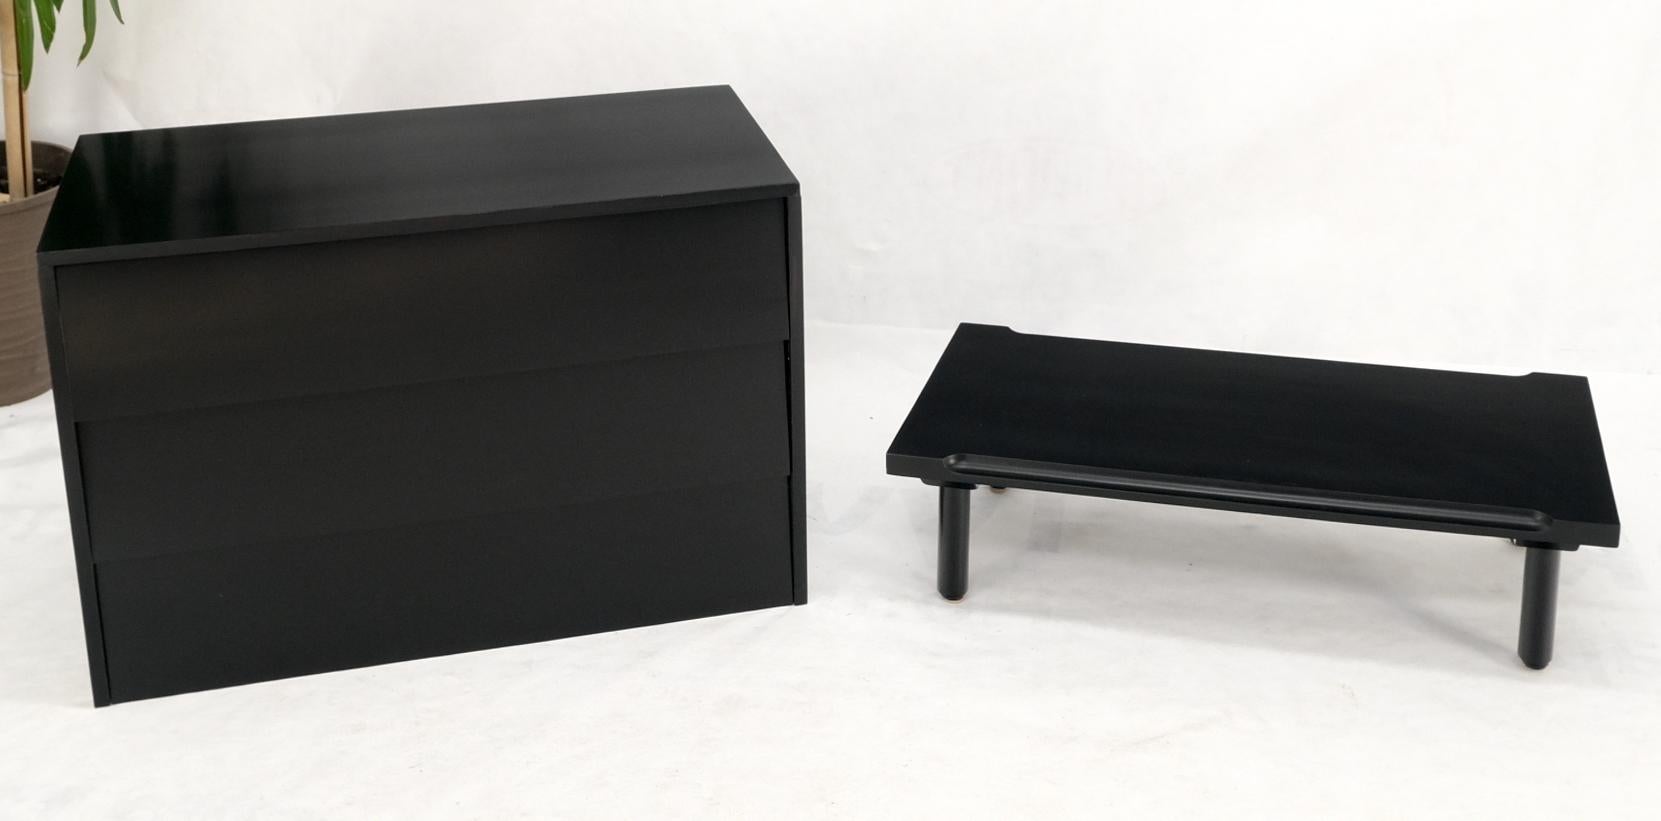 American Black Lacquer 3 Louver Drawers Dresser on a 